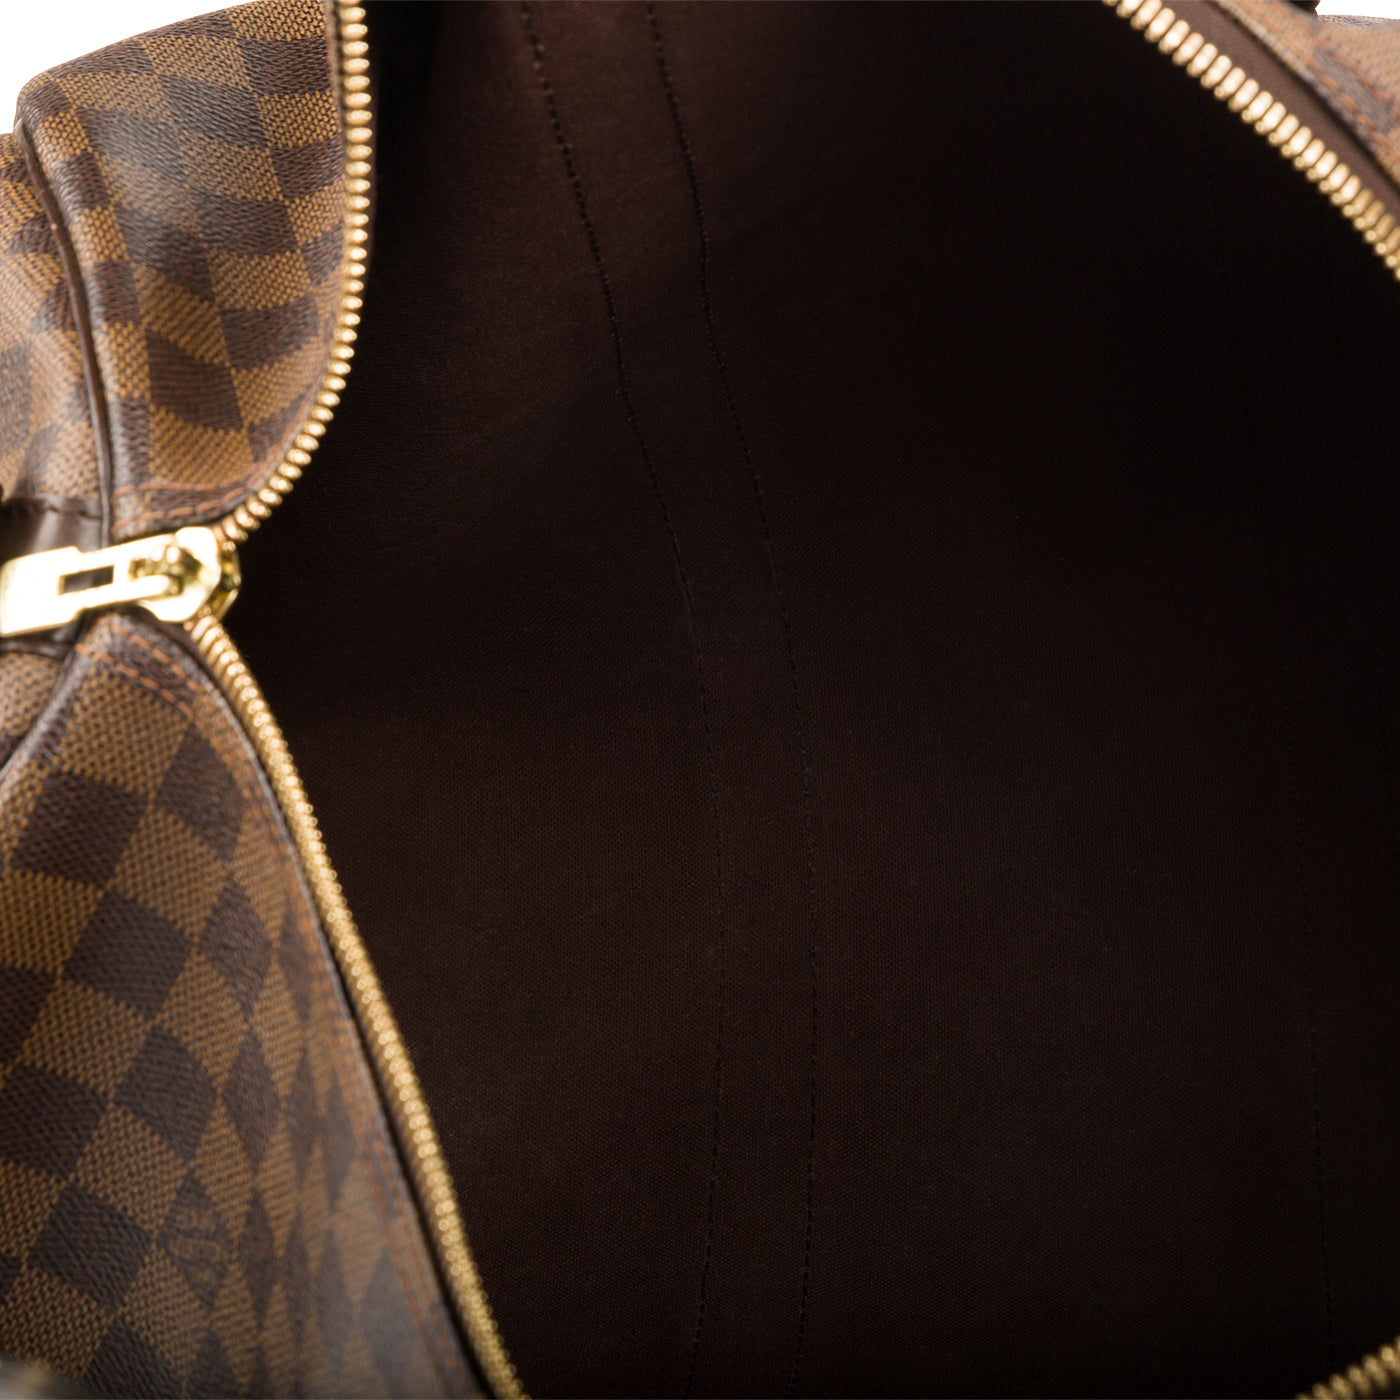 Louis Vuitton Limited Edition Keepall Bandoulière 45 in Damier